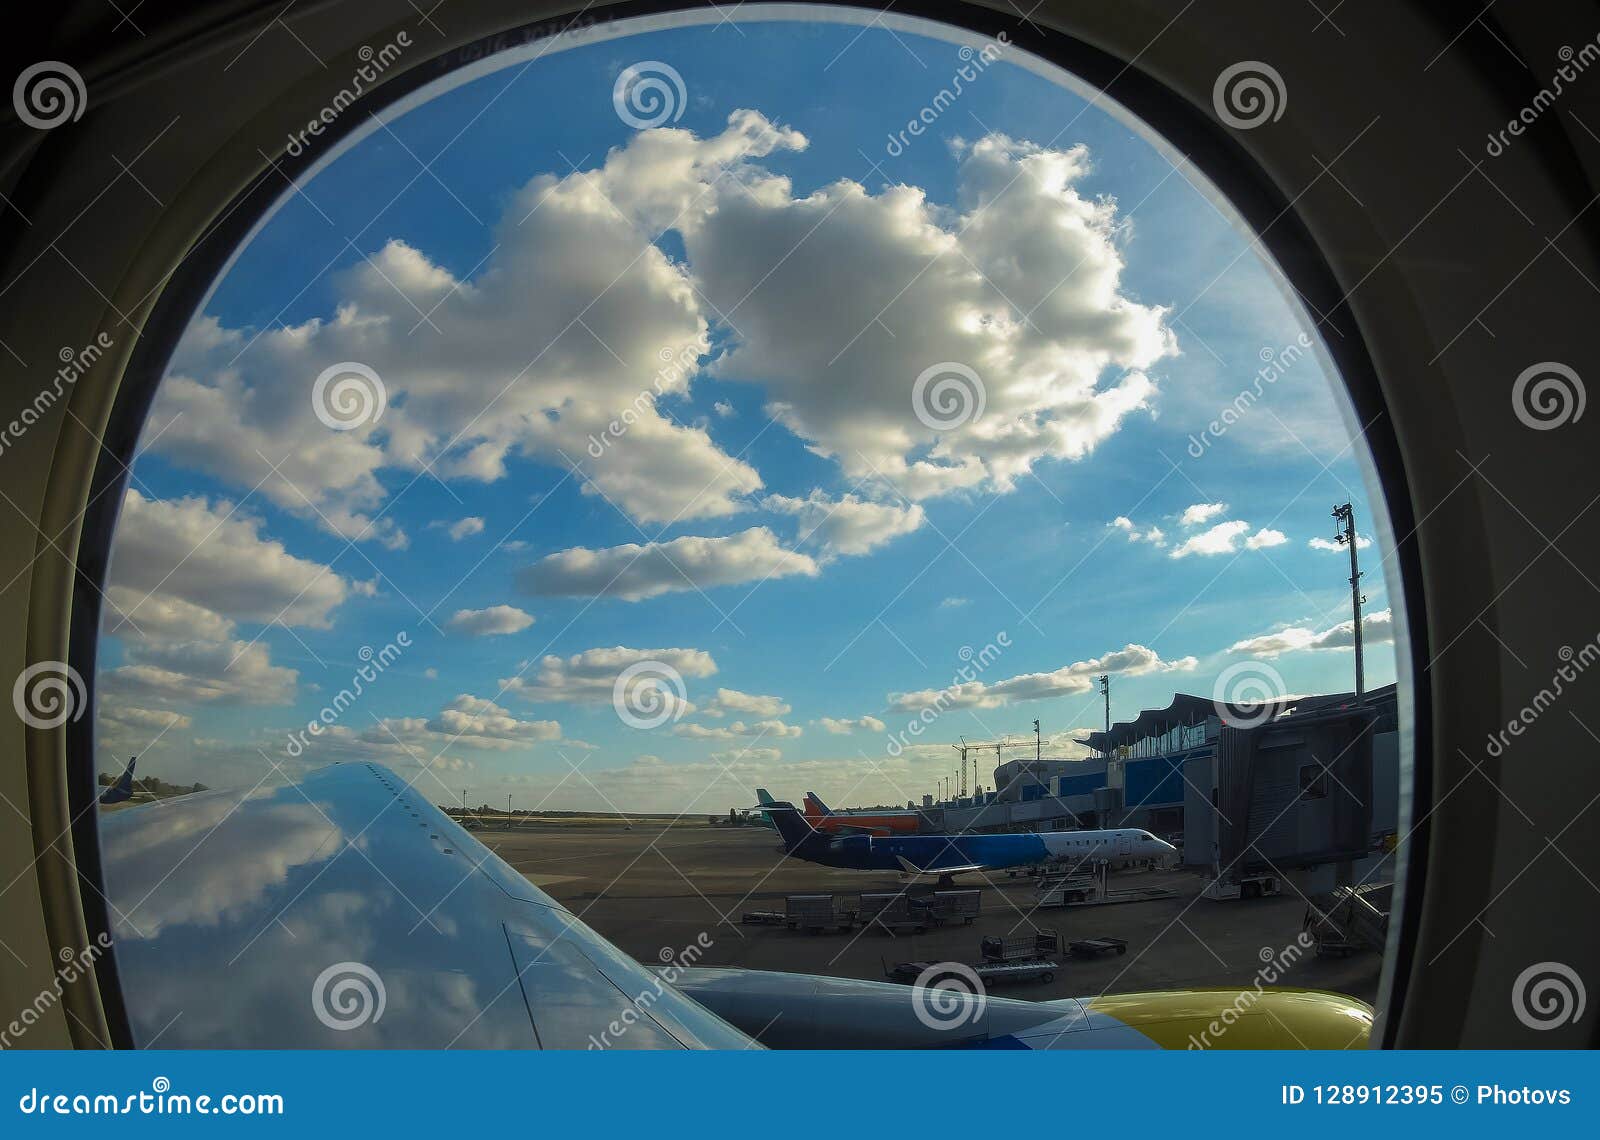 passenger planes at the airport, view through window